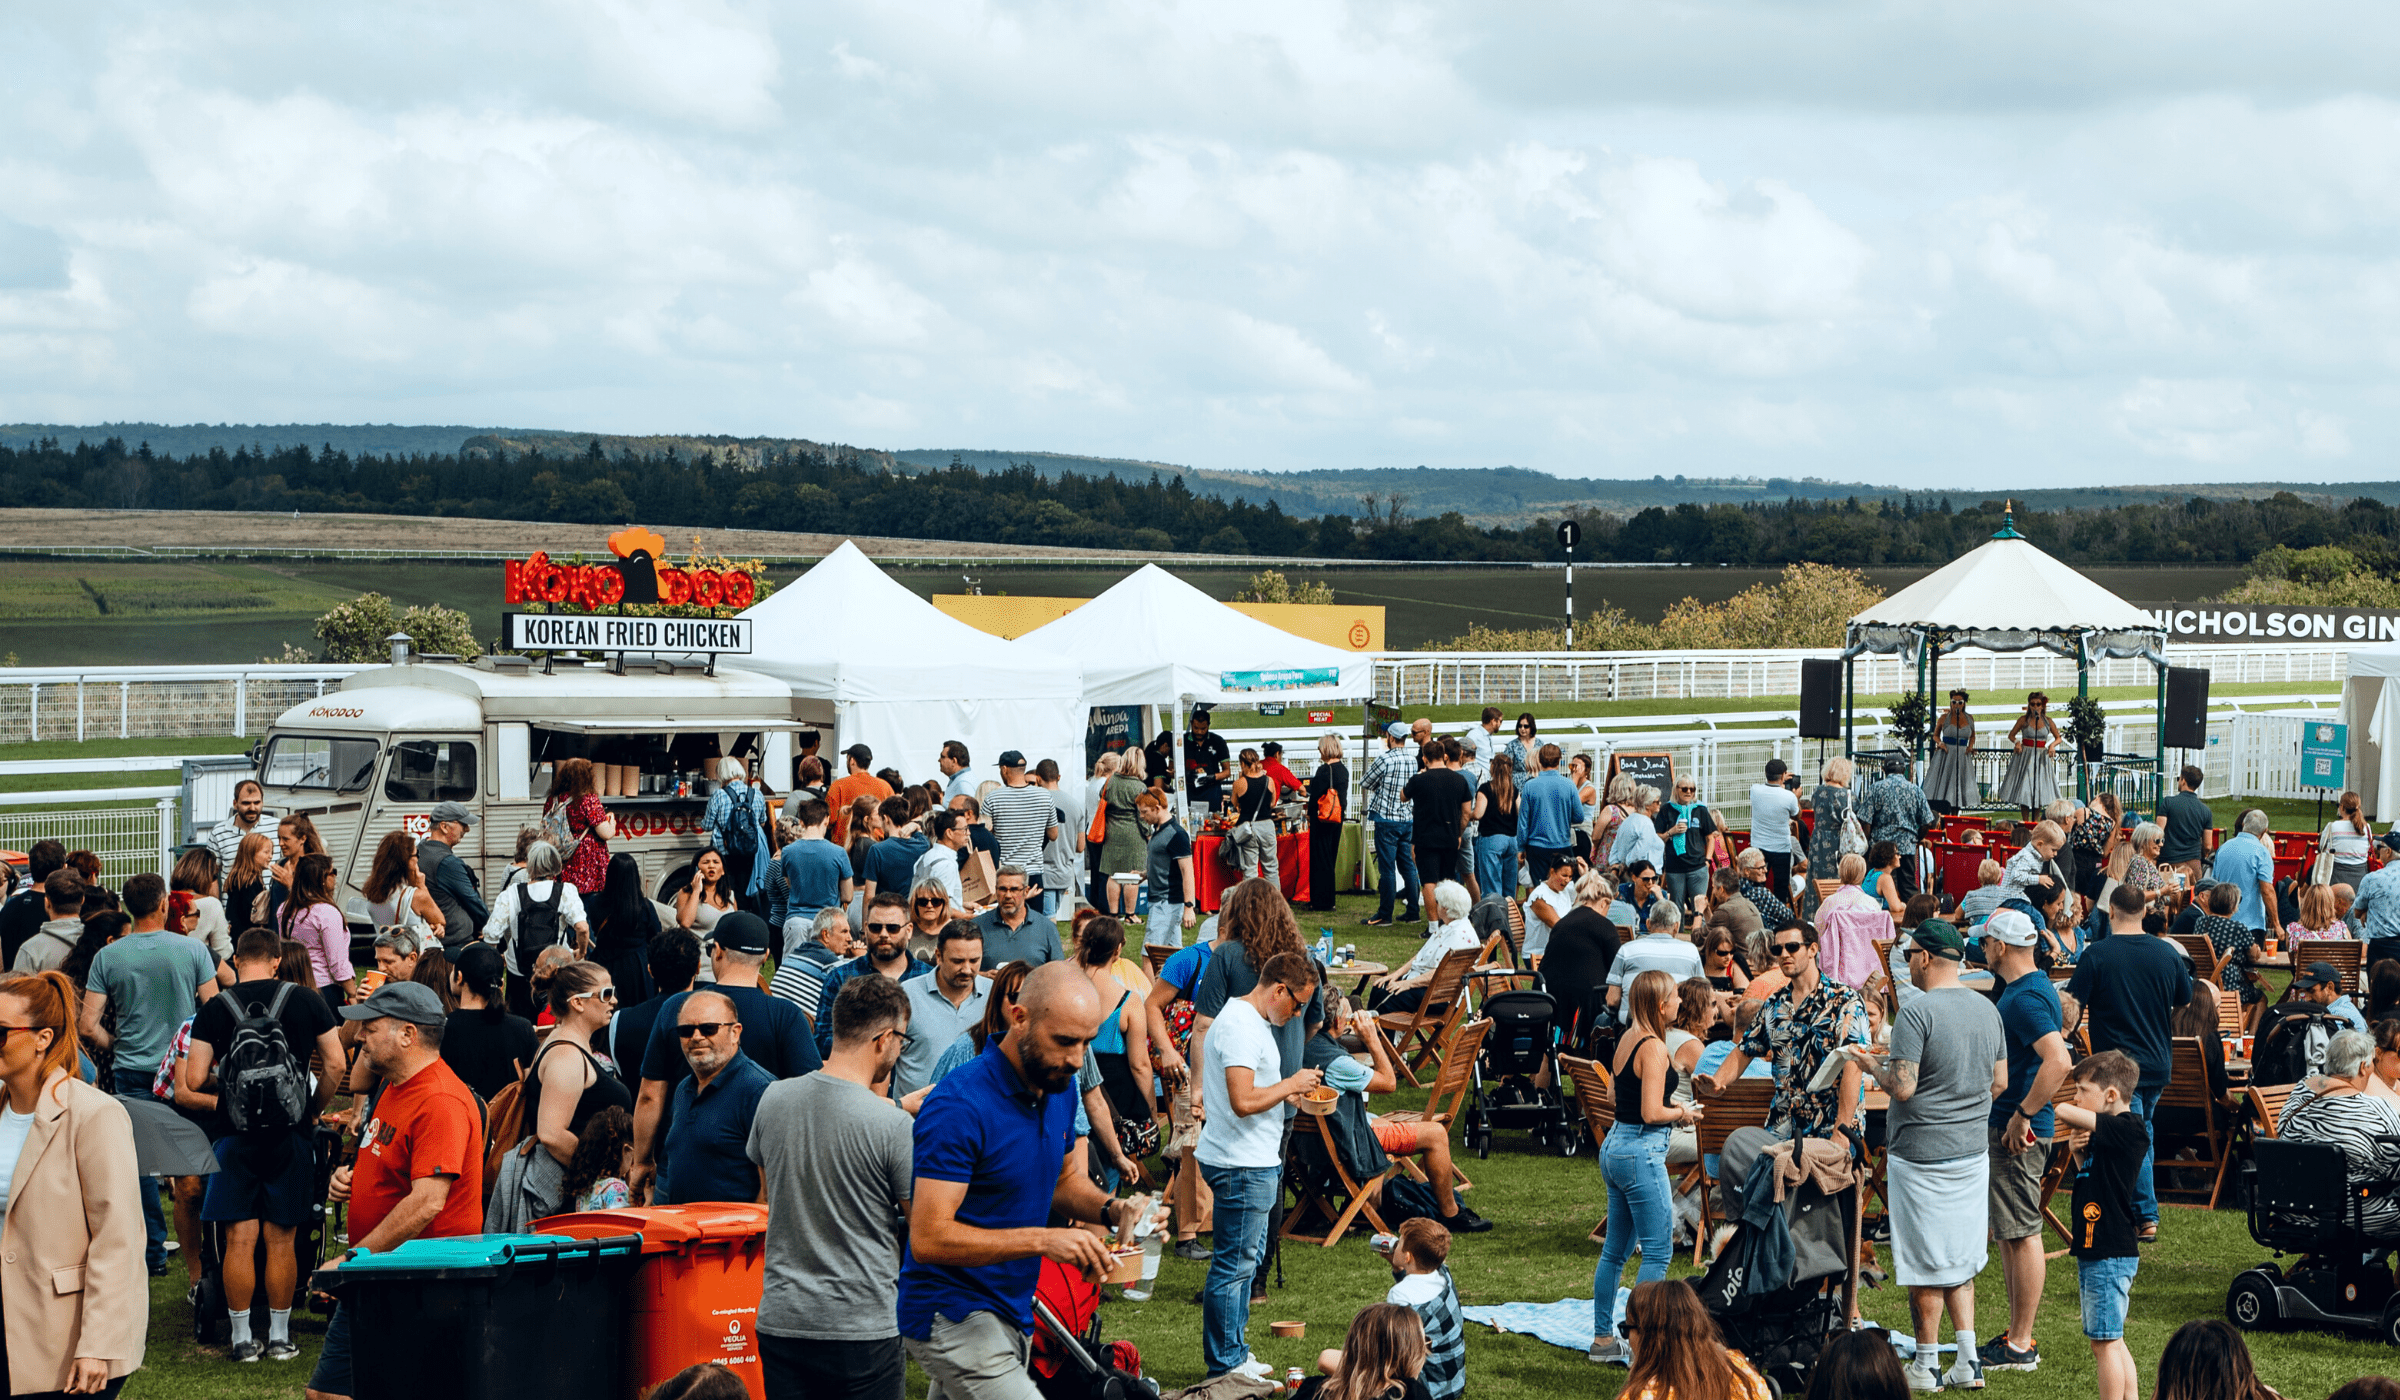 Crowd of festivalgoers alongside the race track at BBC Good Food Festival at Goodwood Racecourse